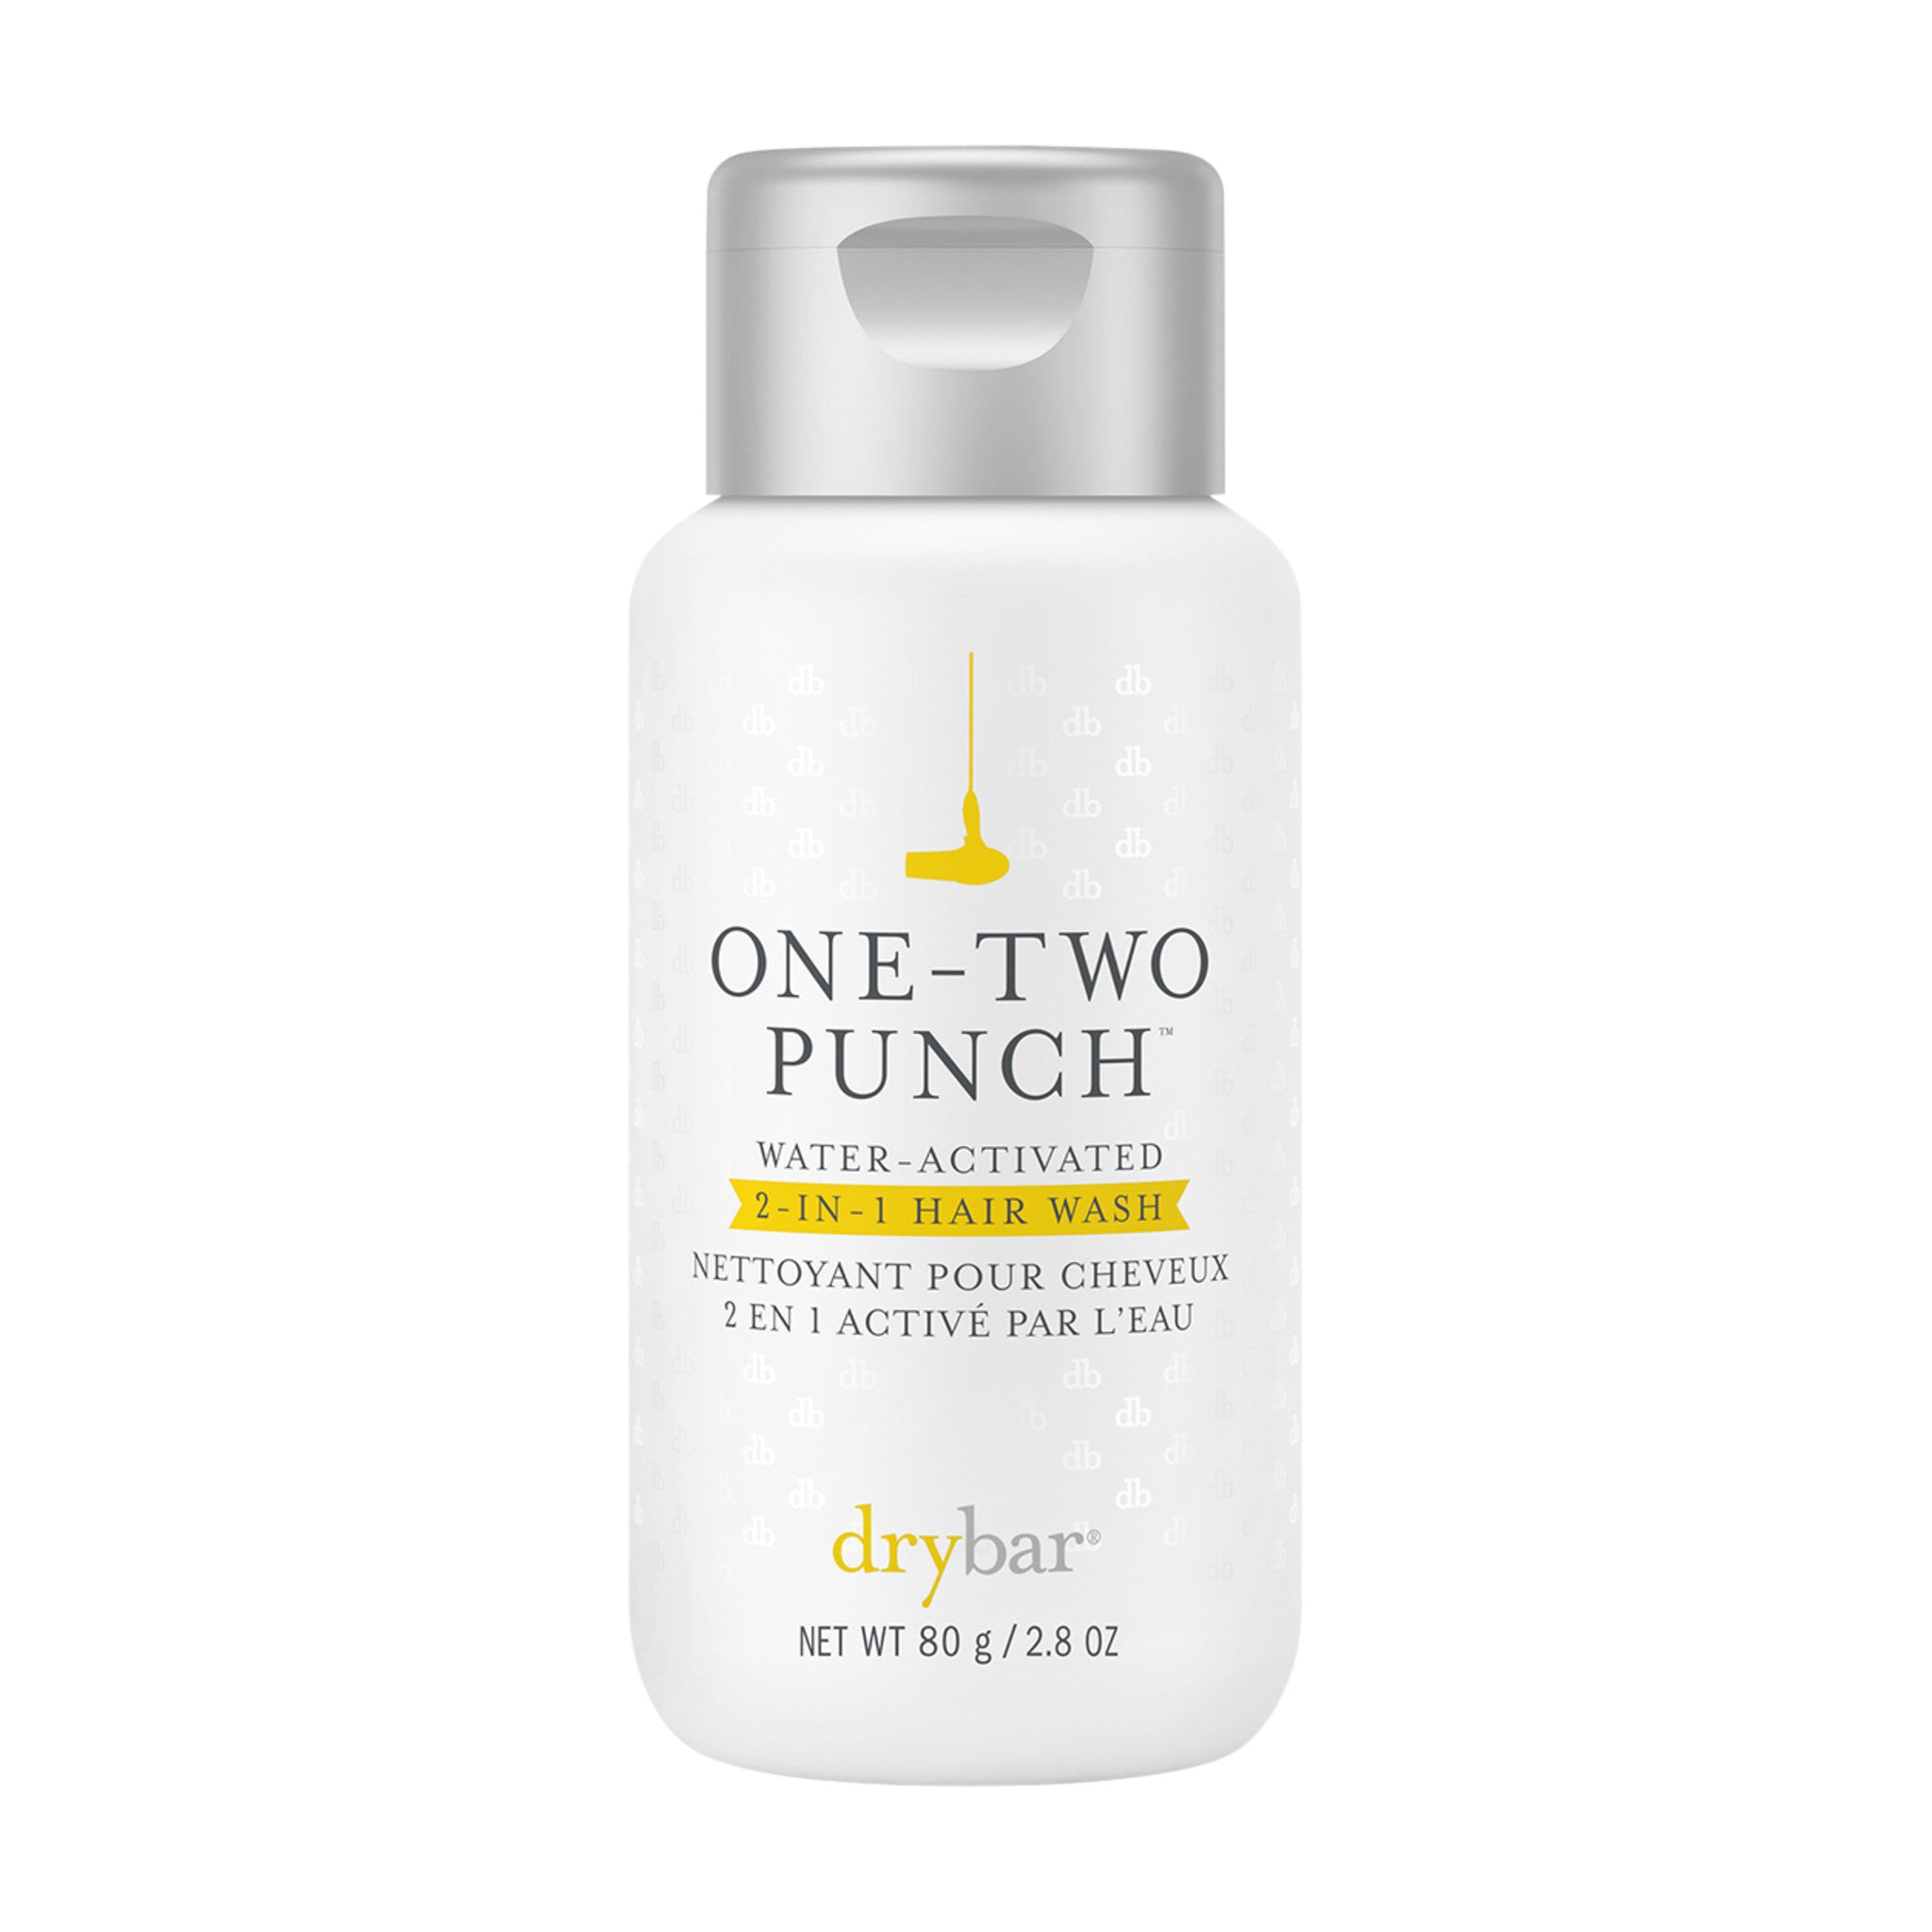 Drybar One-Two Punch Water-Activated 2-in-1 Hair Wash main image.